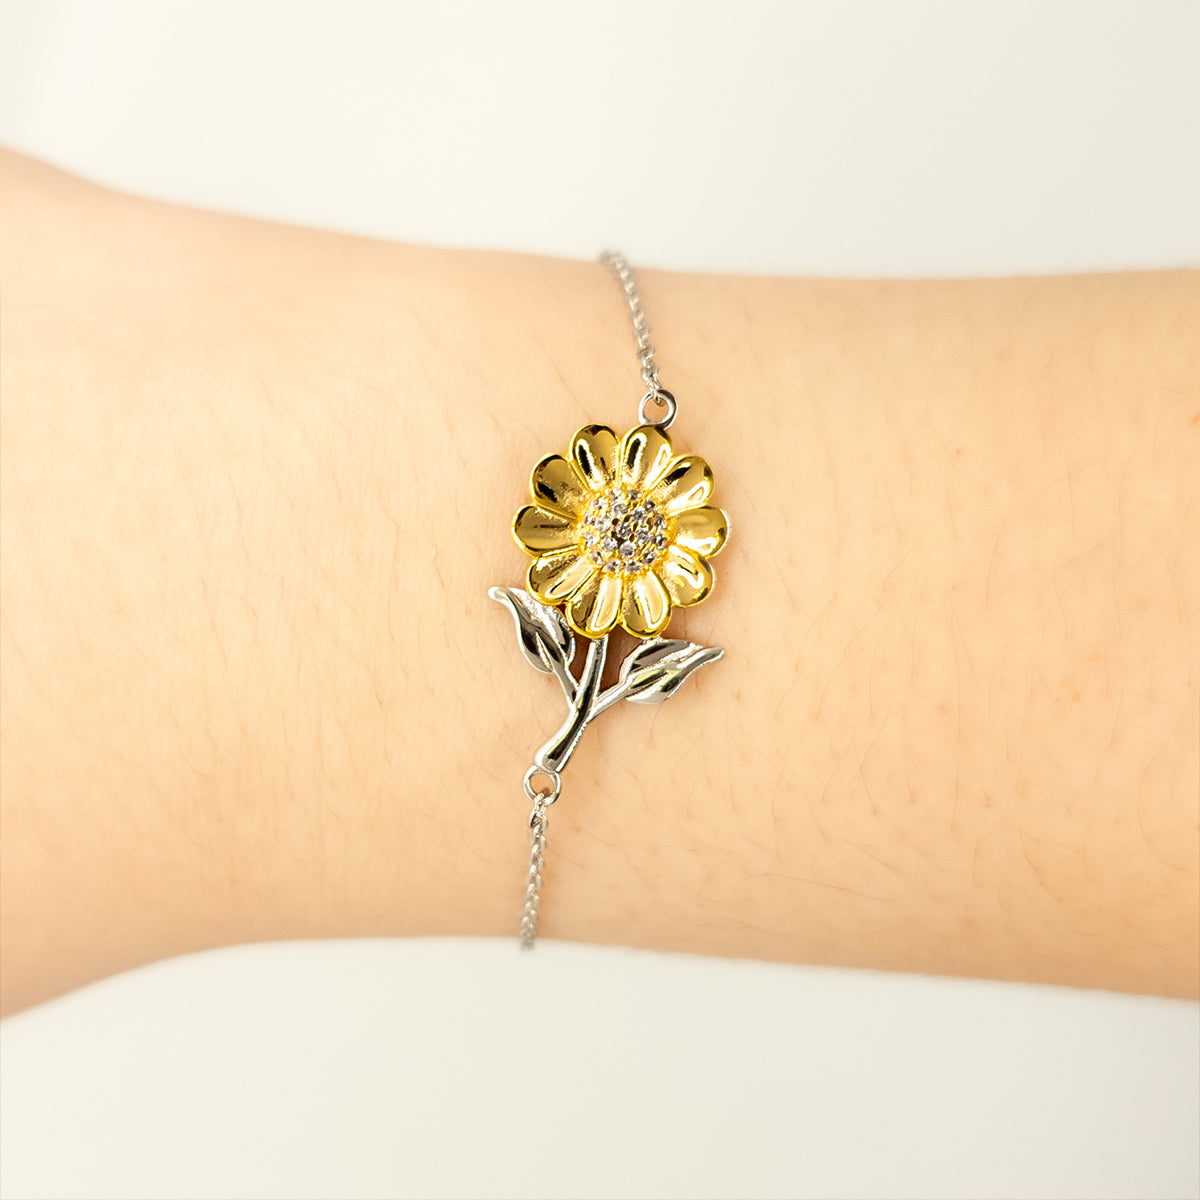 Ouma Sunflower Bracelet - A Unique Gift To Show Your Love and Gratitude - Engraved Hope and Inspirational Confidence - Perfect Birthday, Christmas, and Graduation Present for Ouma